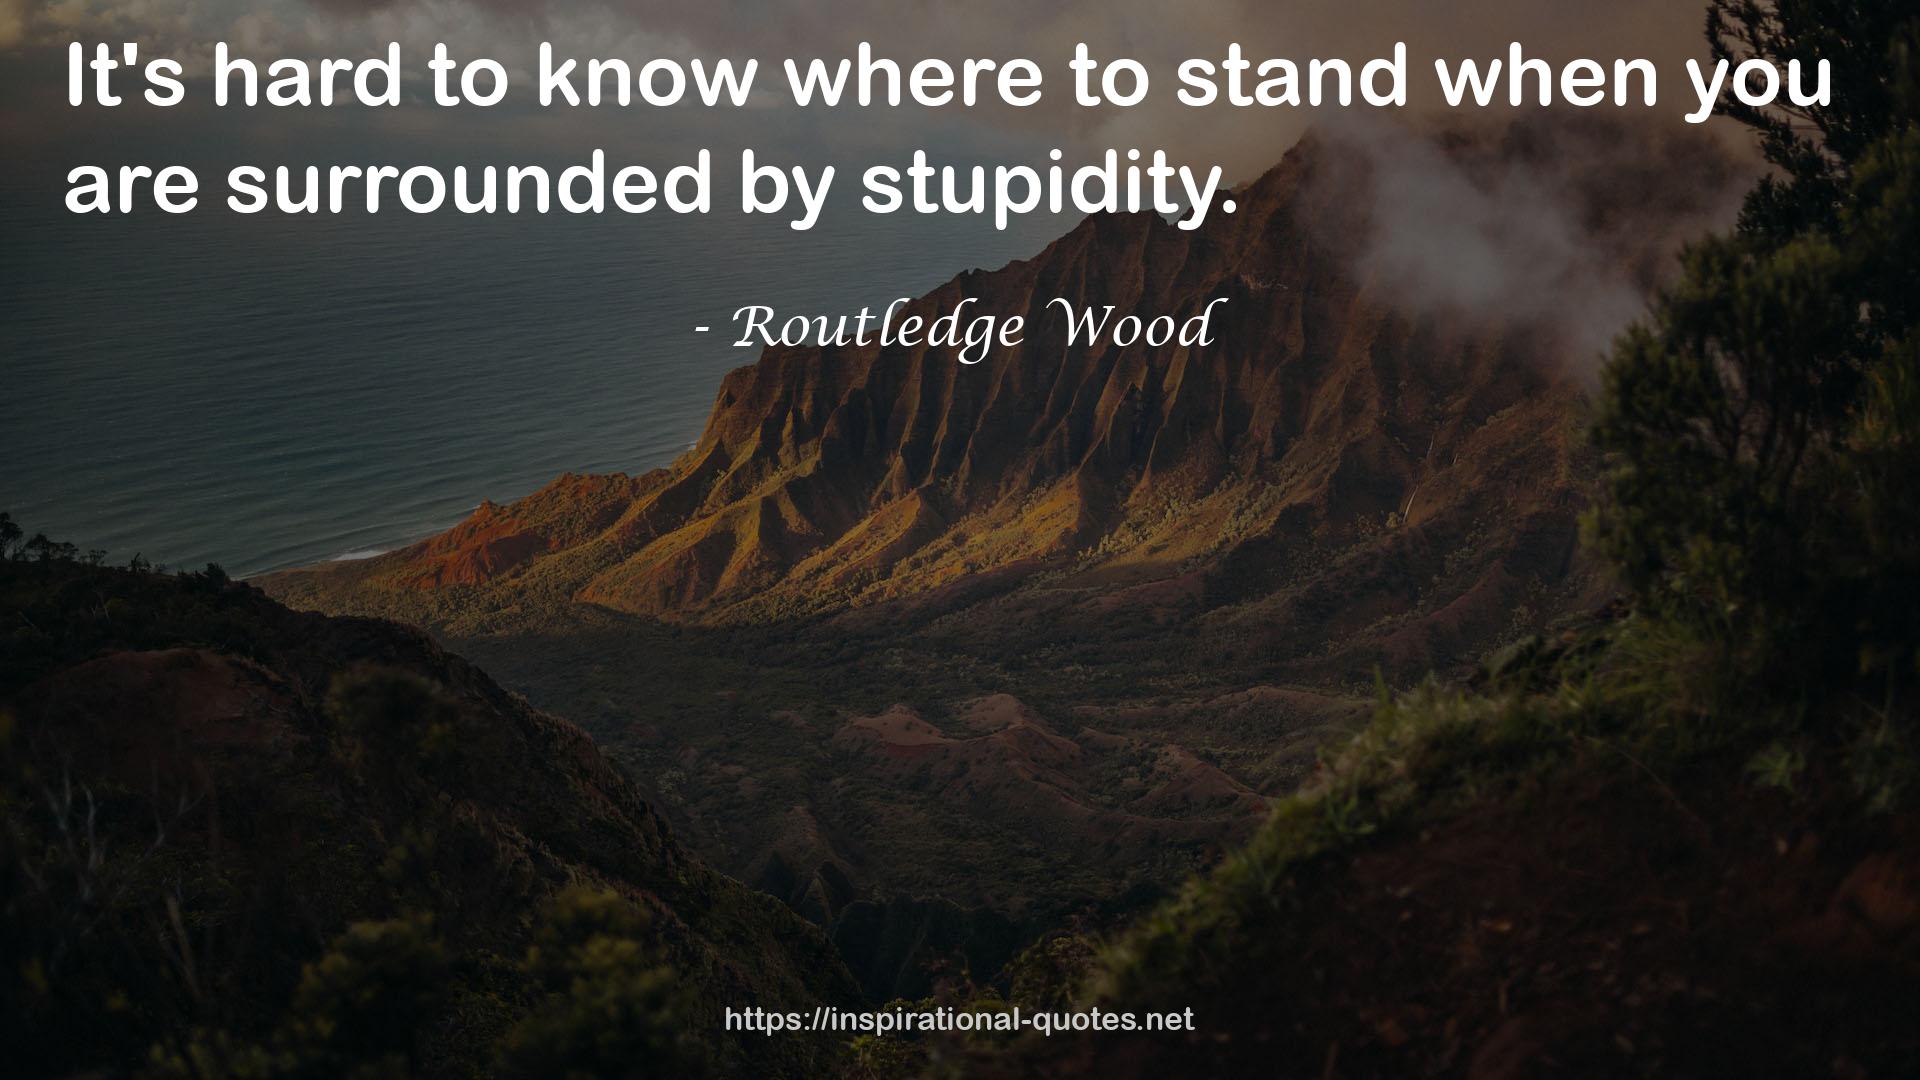 Routledge Wood QUOTES